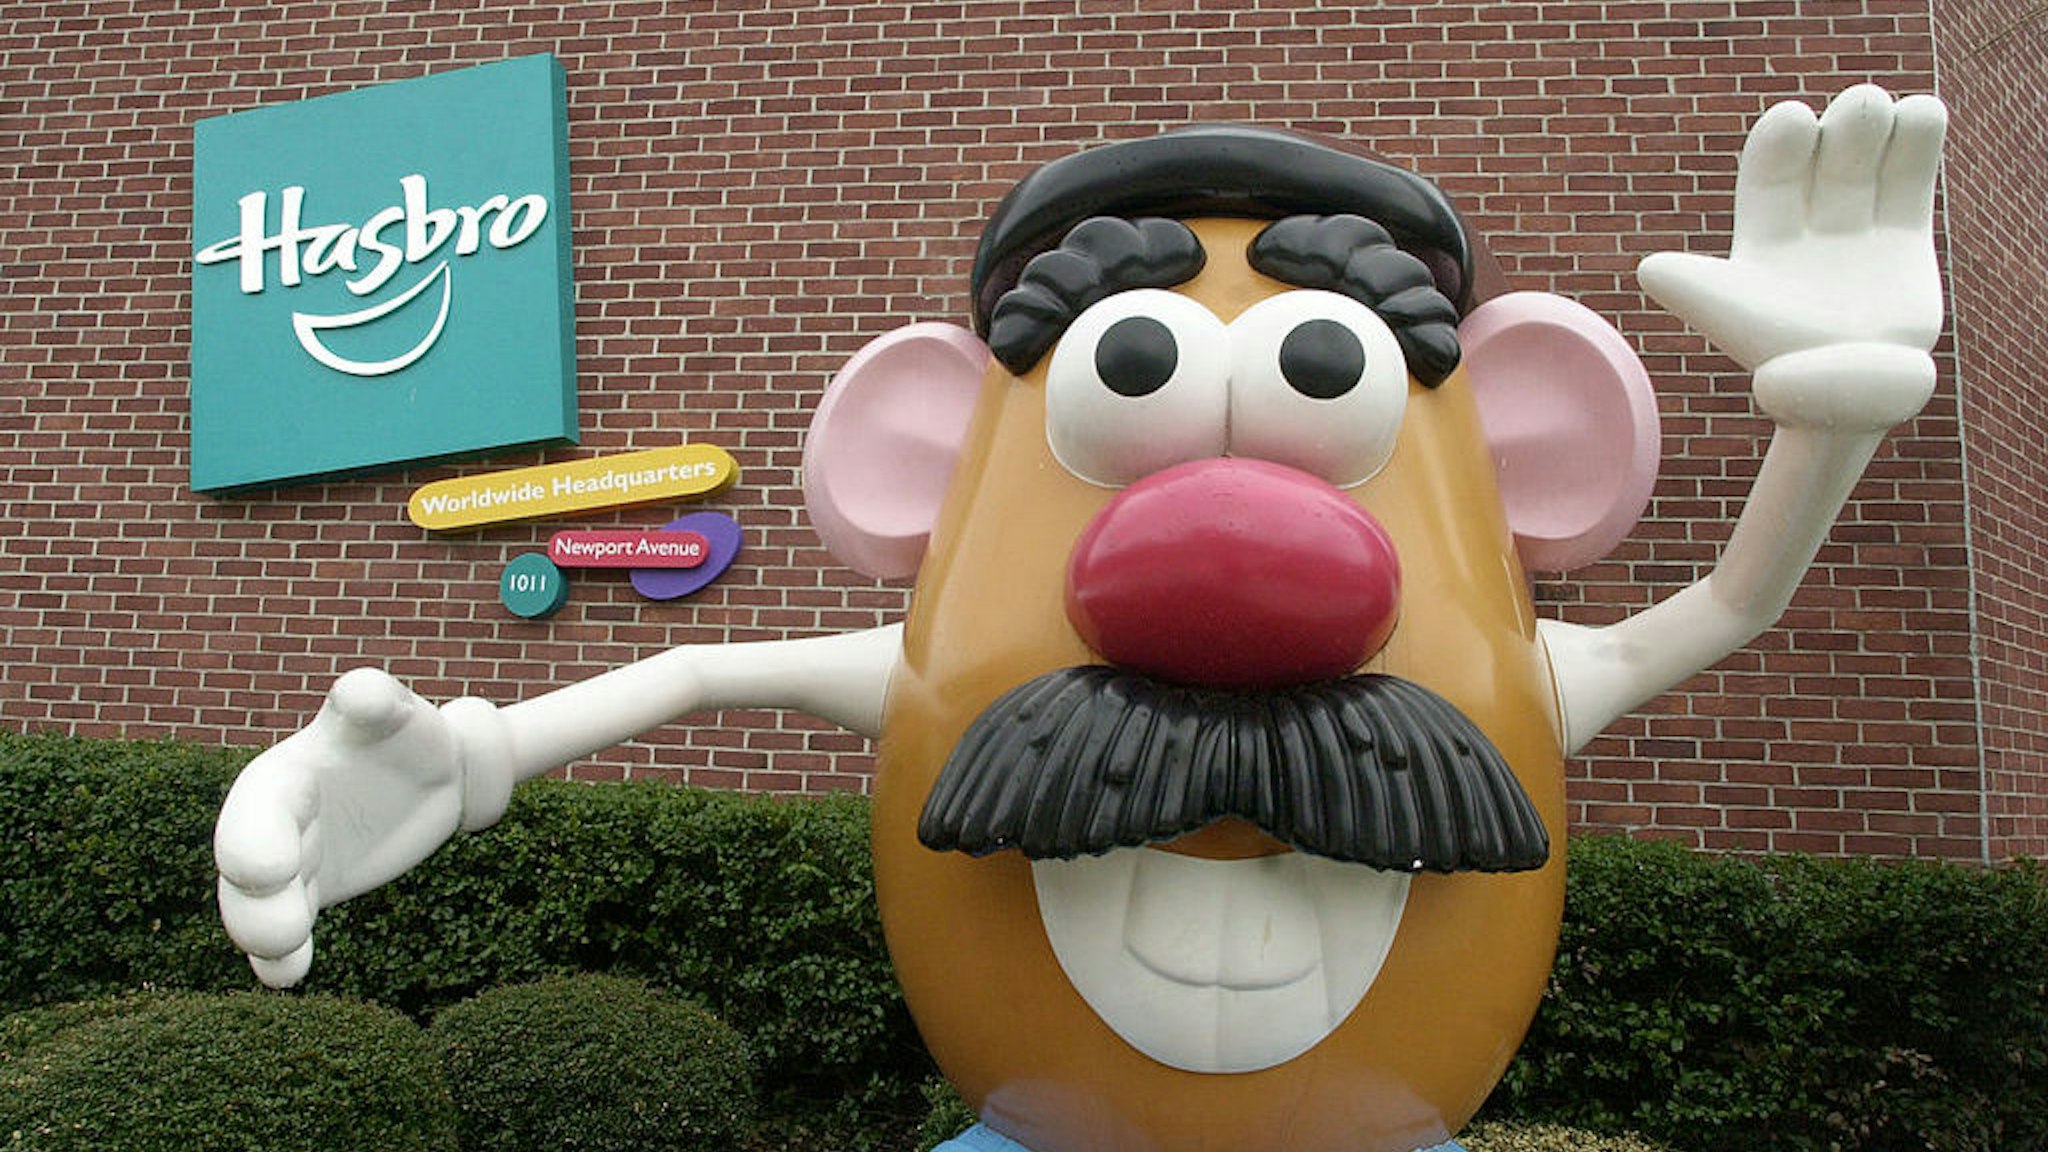 A statue of Mr. Potato Head greets visitors to the corporate headquarters of toymaker Hasbro Inc. in Pawtucket, Rhode Island, on Friday, April 23, 2004. Photographer: Michael Springer/Bloomberg News